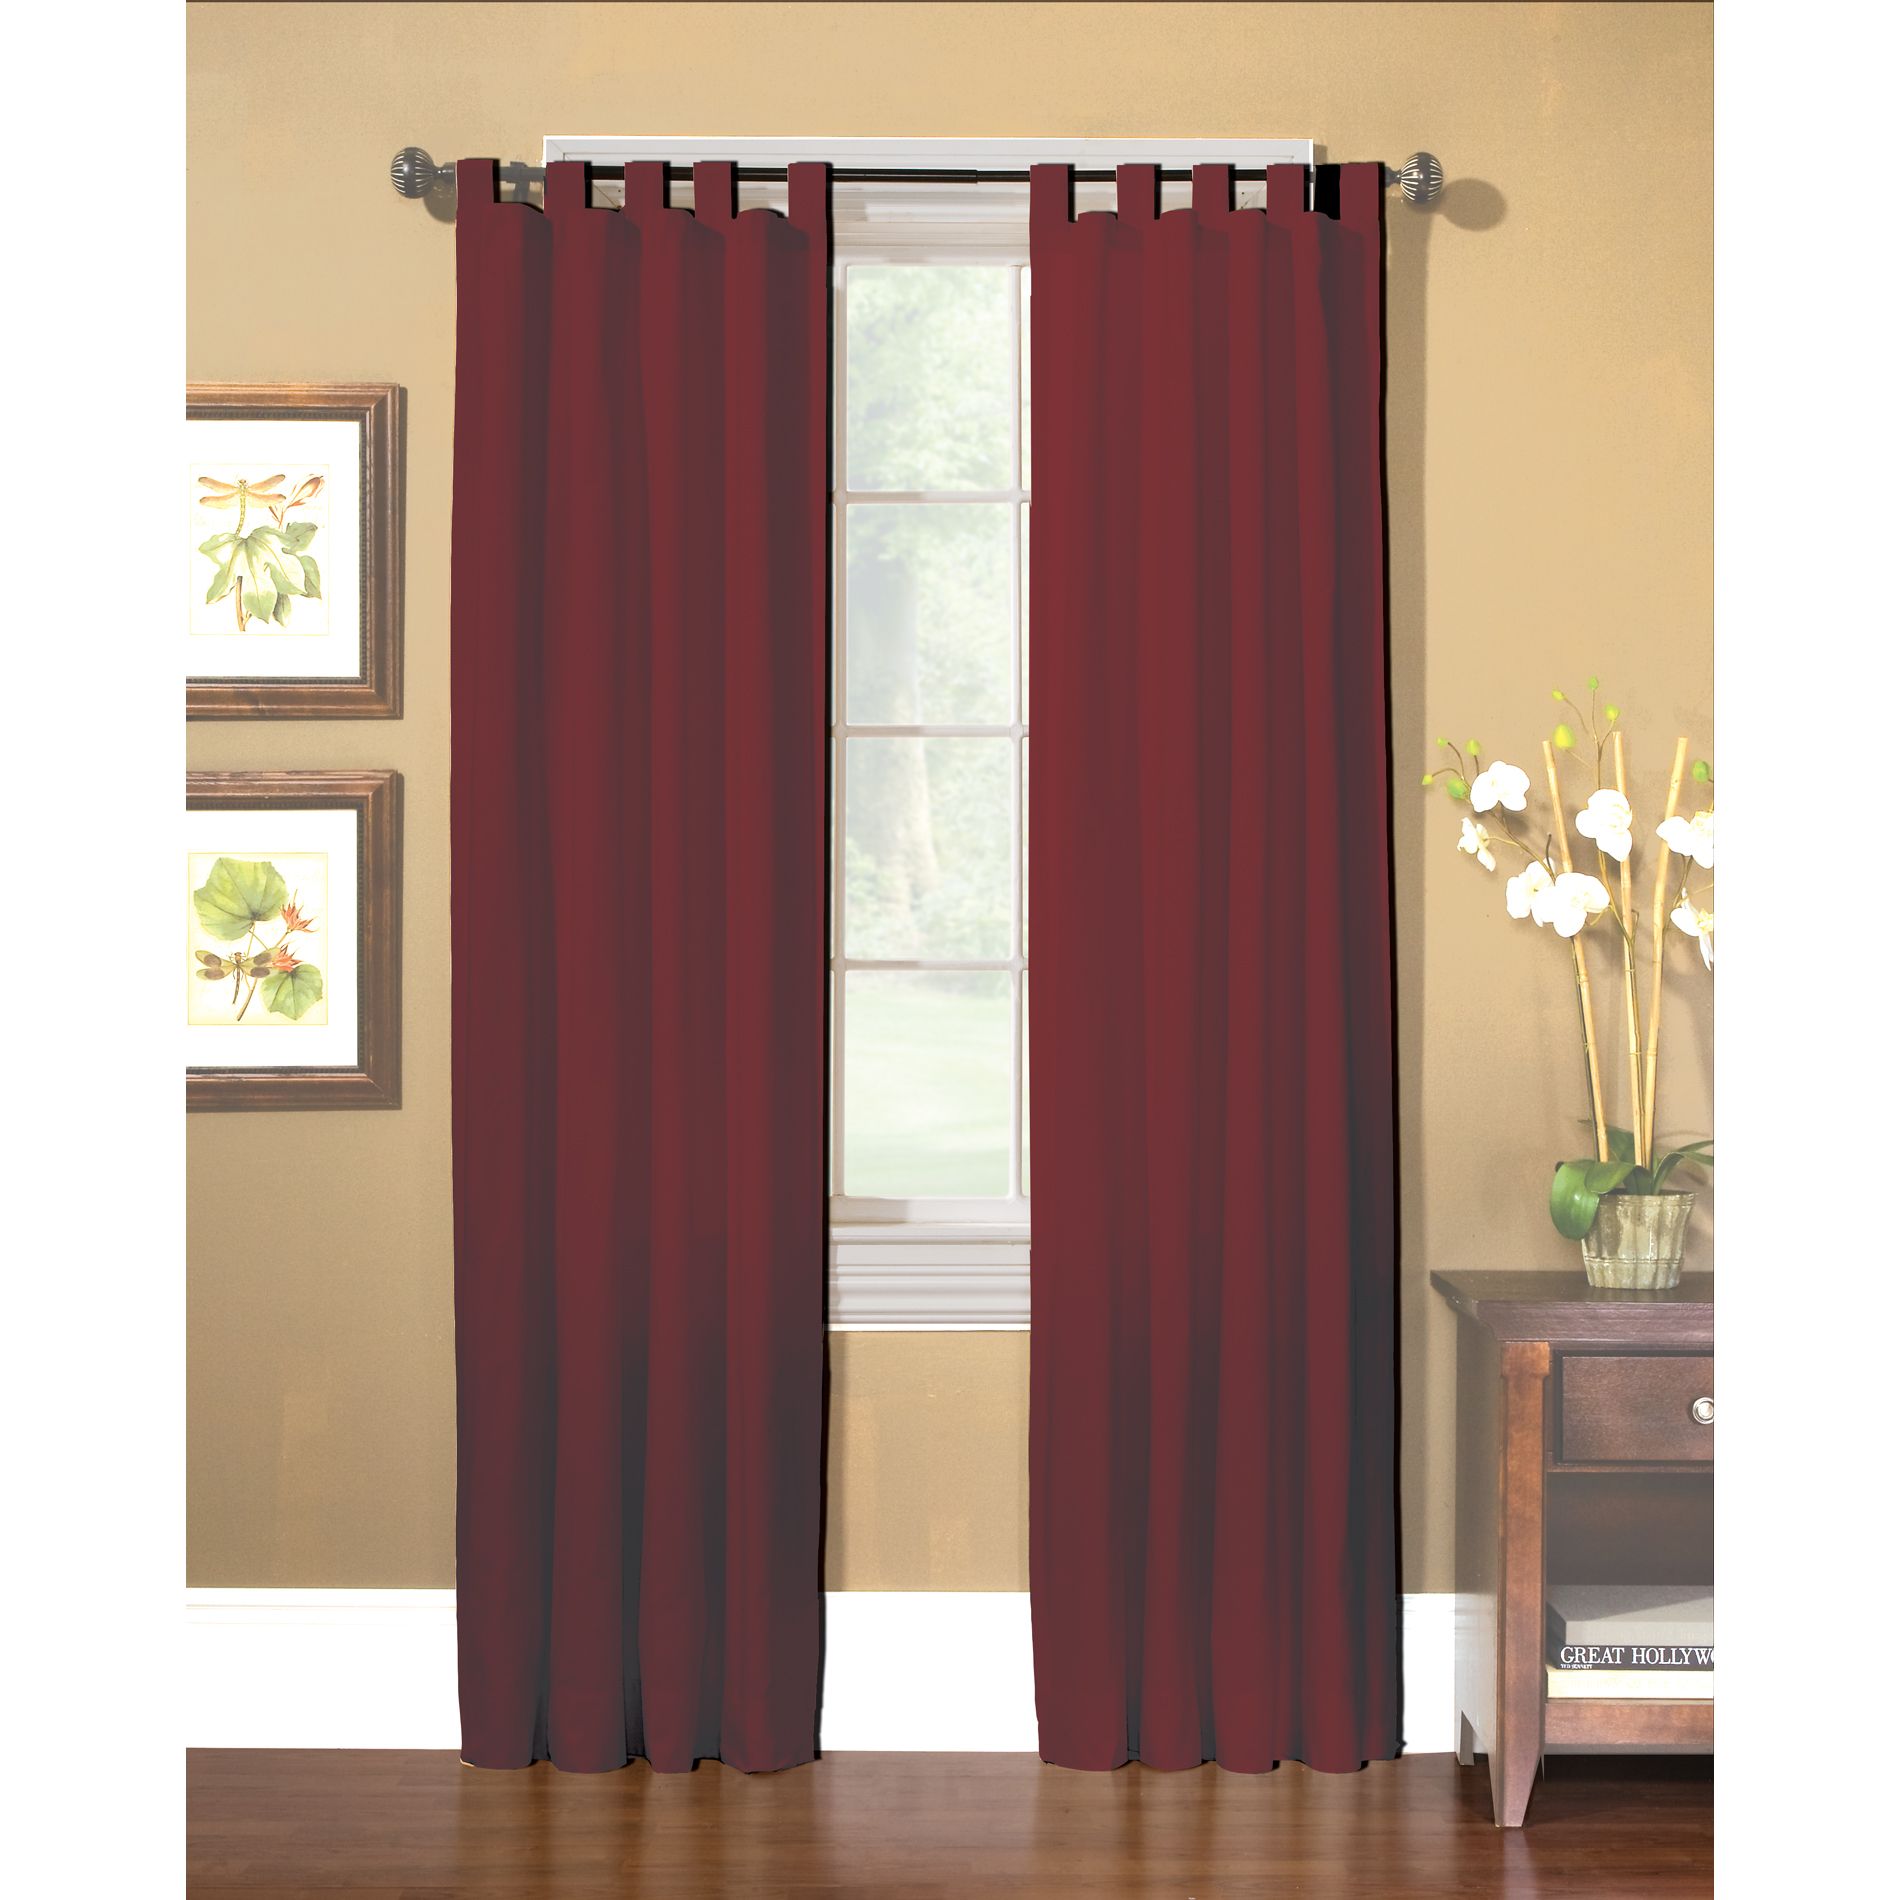 Country Living Americana Red Sailcloth Window Panels